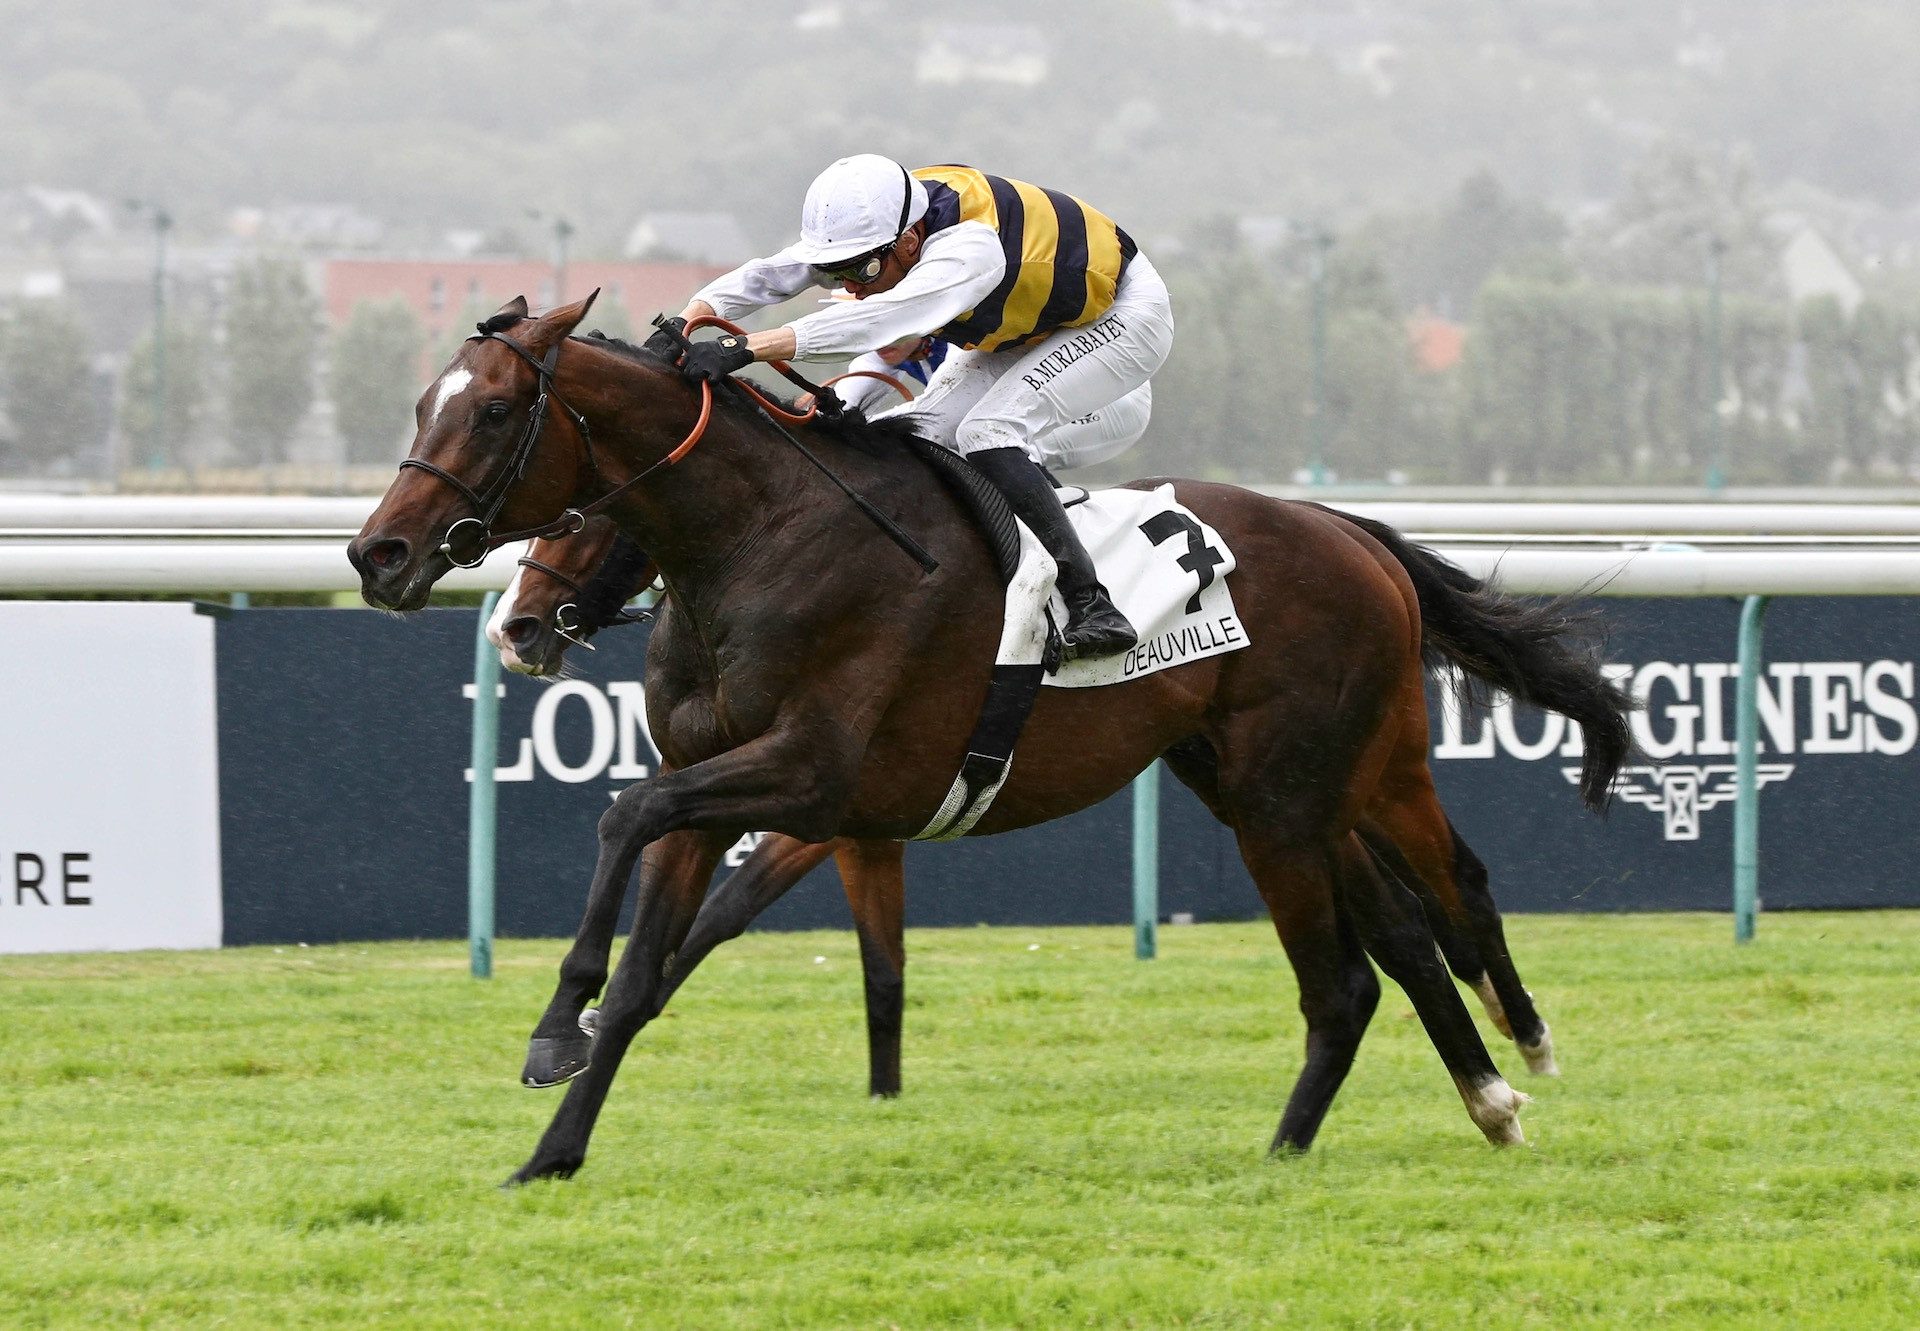 Sevenna’s Knight (Camelot) Wins The Listed Prix Michel Houyvet at Deauville